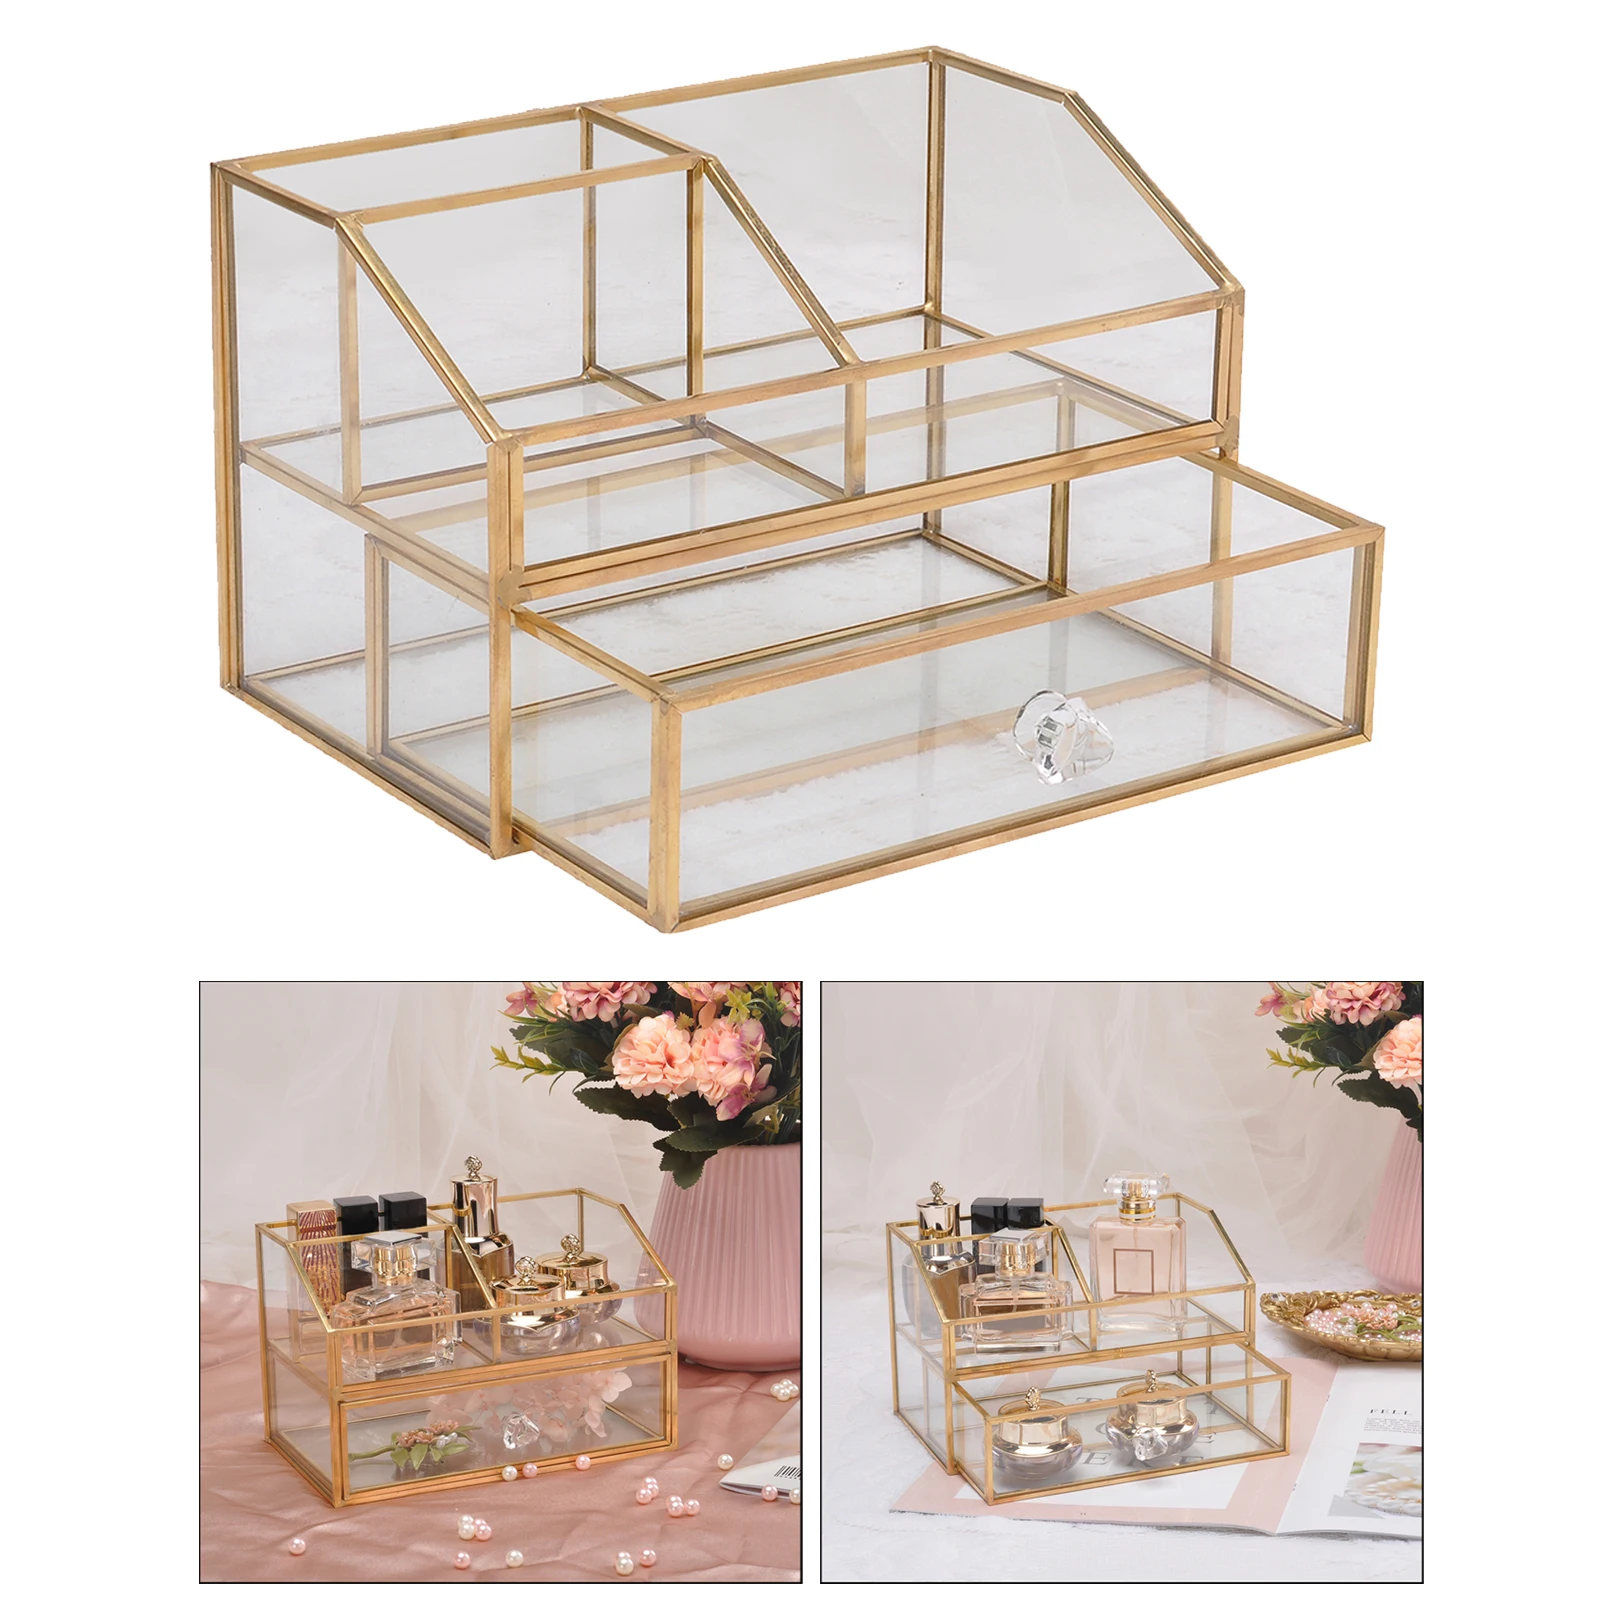 Cosmetics Display Box Jewelry Case Holder Clear Glass Tiered Organizer Makeup Tools Storage Container Holder Decorative Box